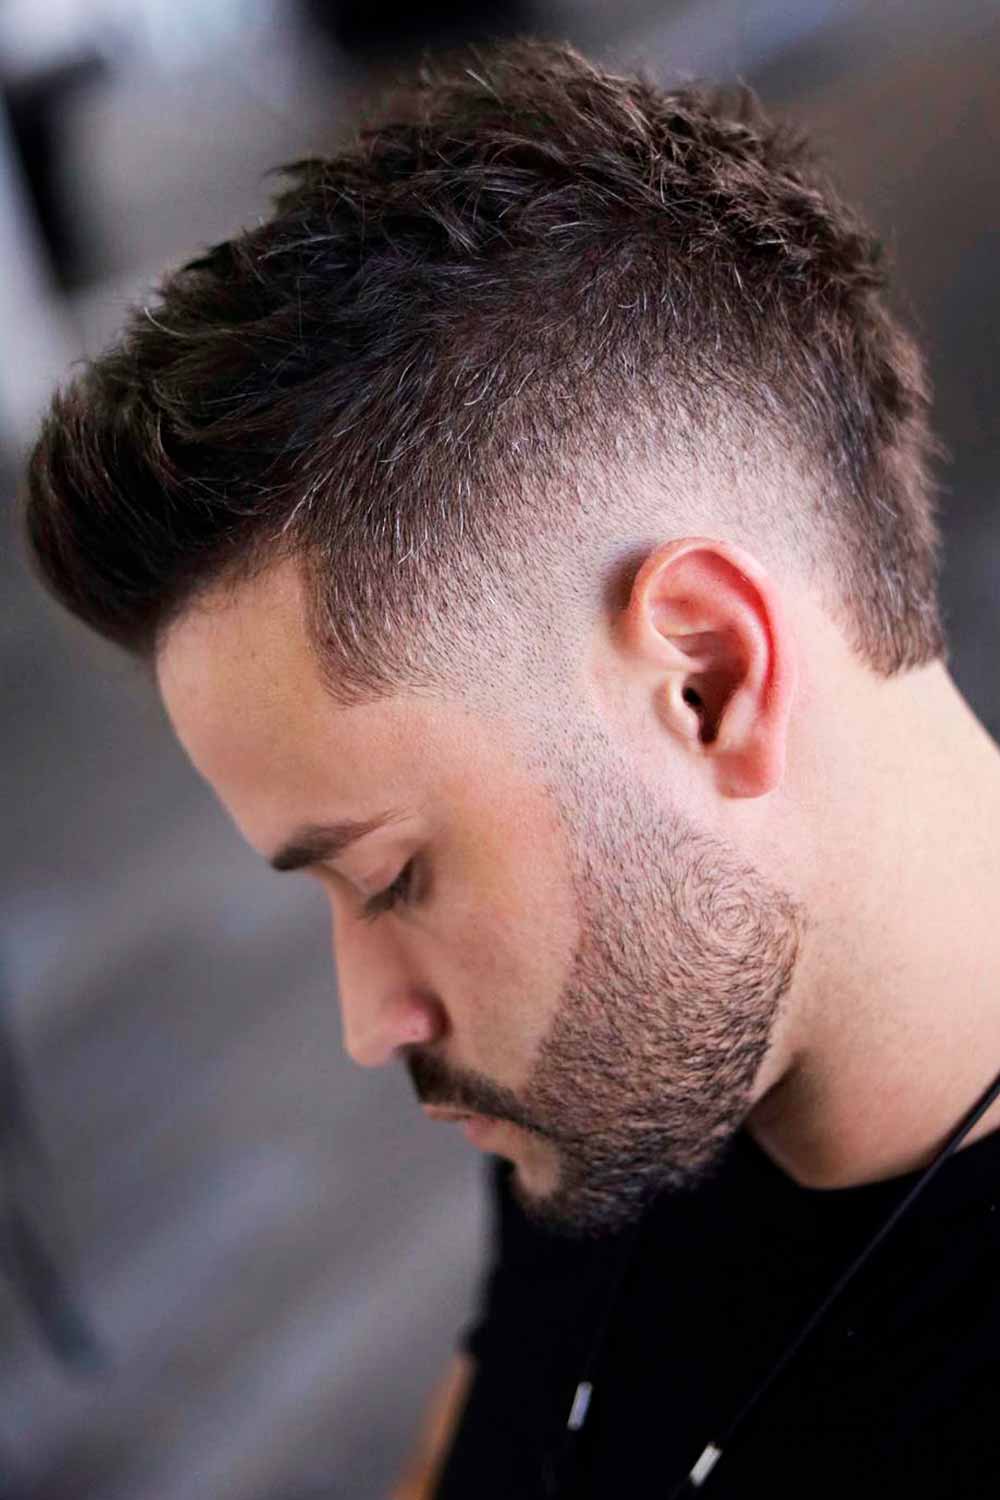 Mullet Fade #thickahirmen #haircutsformenwiththickhair #thickhairhaircuts